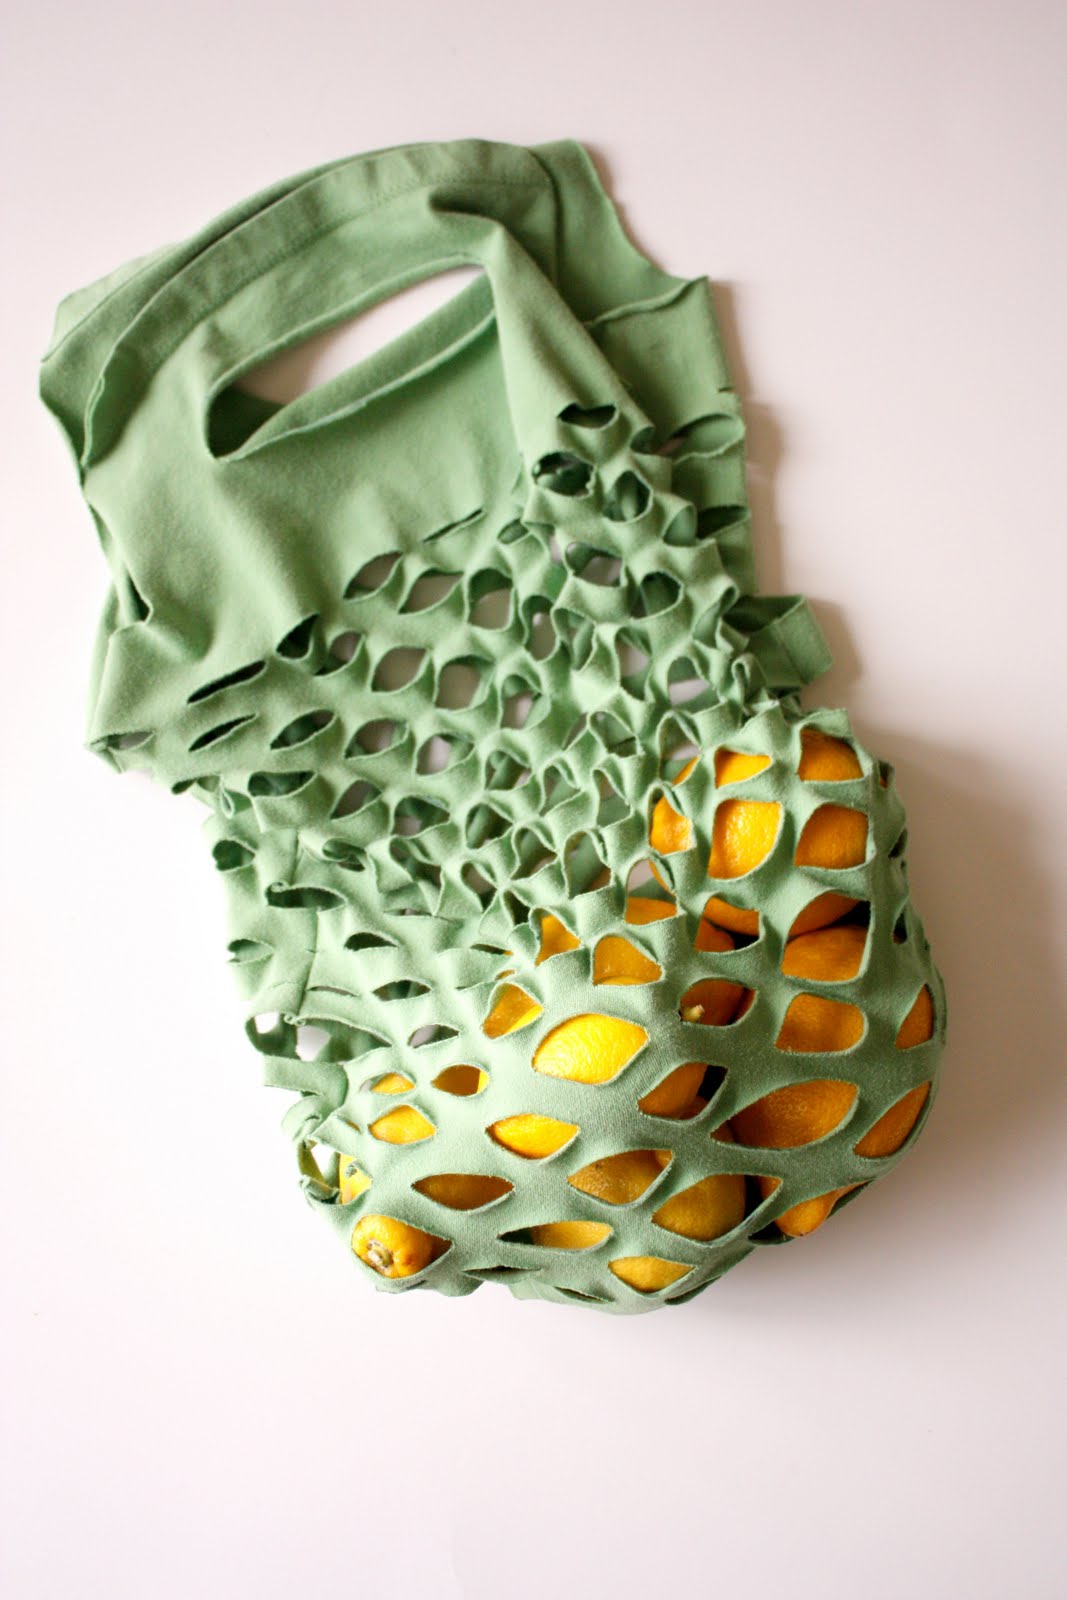 Simple DIY produce bag from a t-shirt.